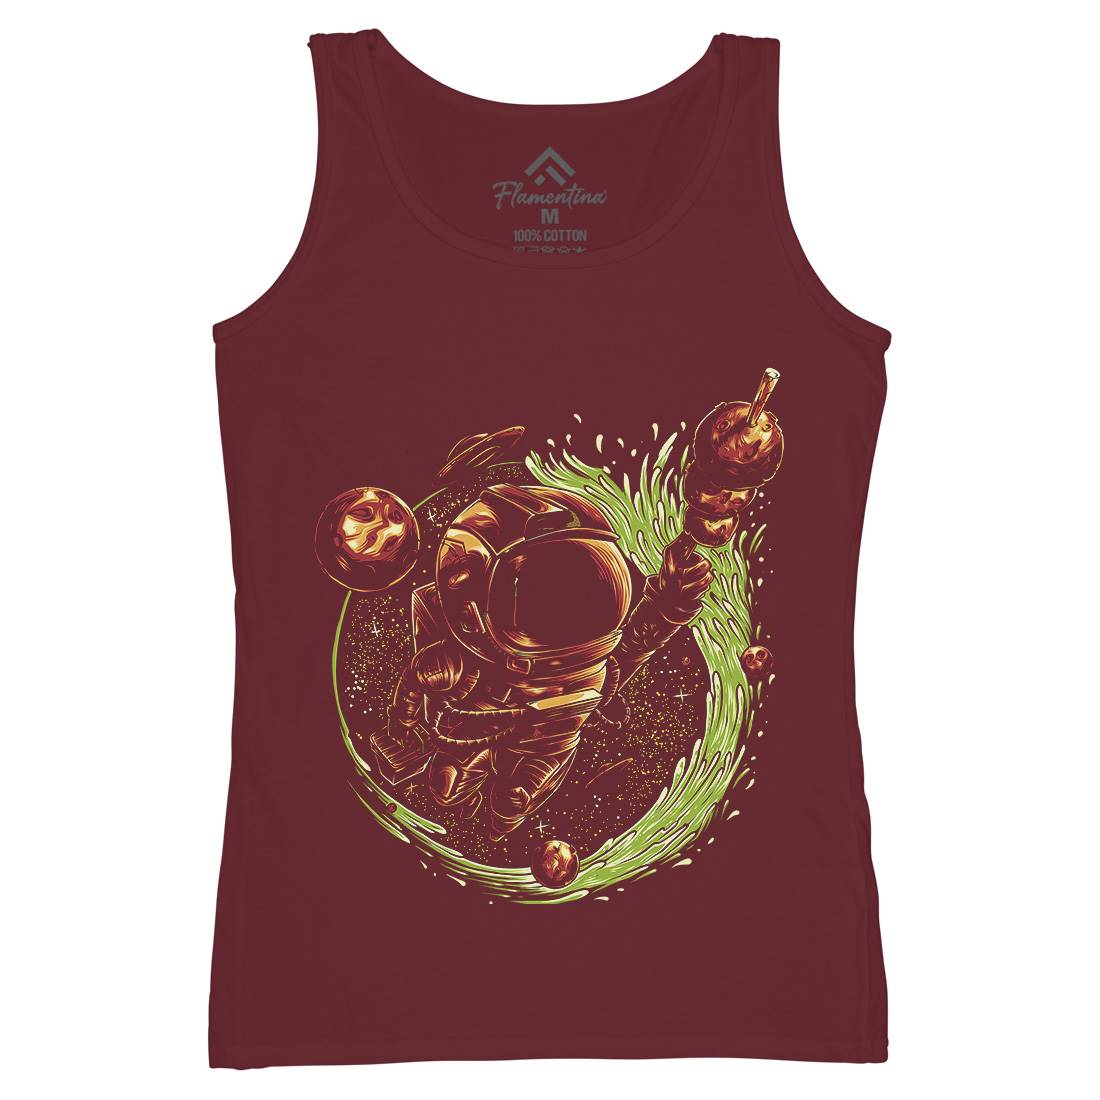 Grilled Meatball Womens Organic Tank Top Vest Space D037